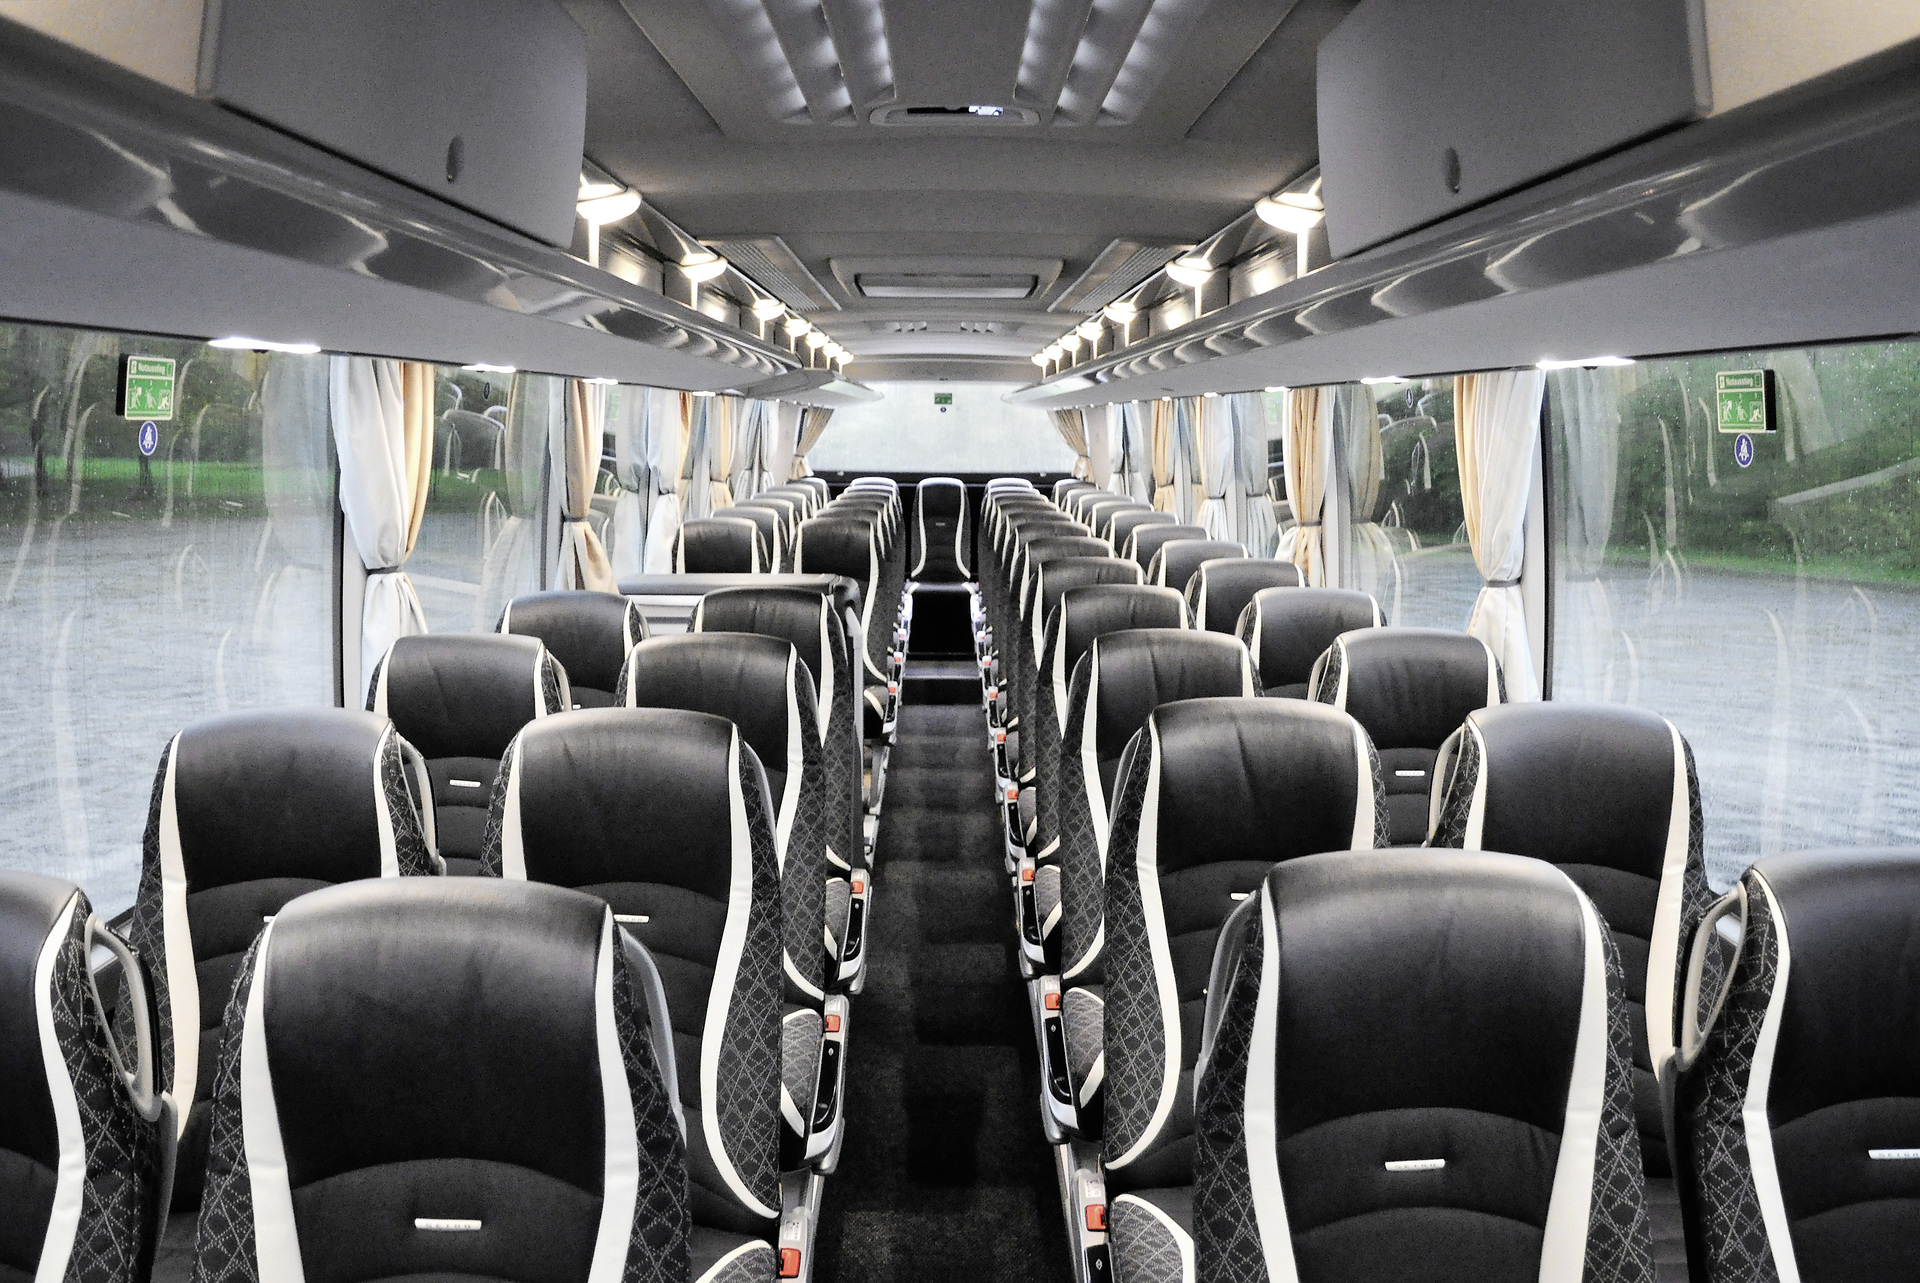 A Setra with privacy